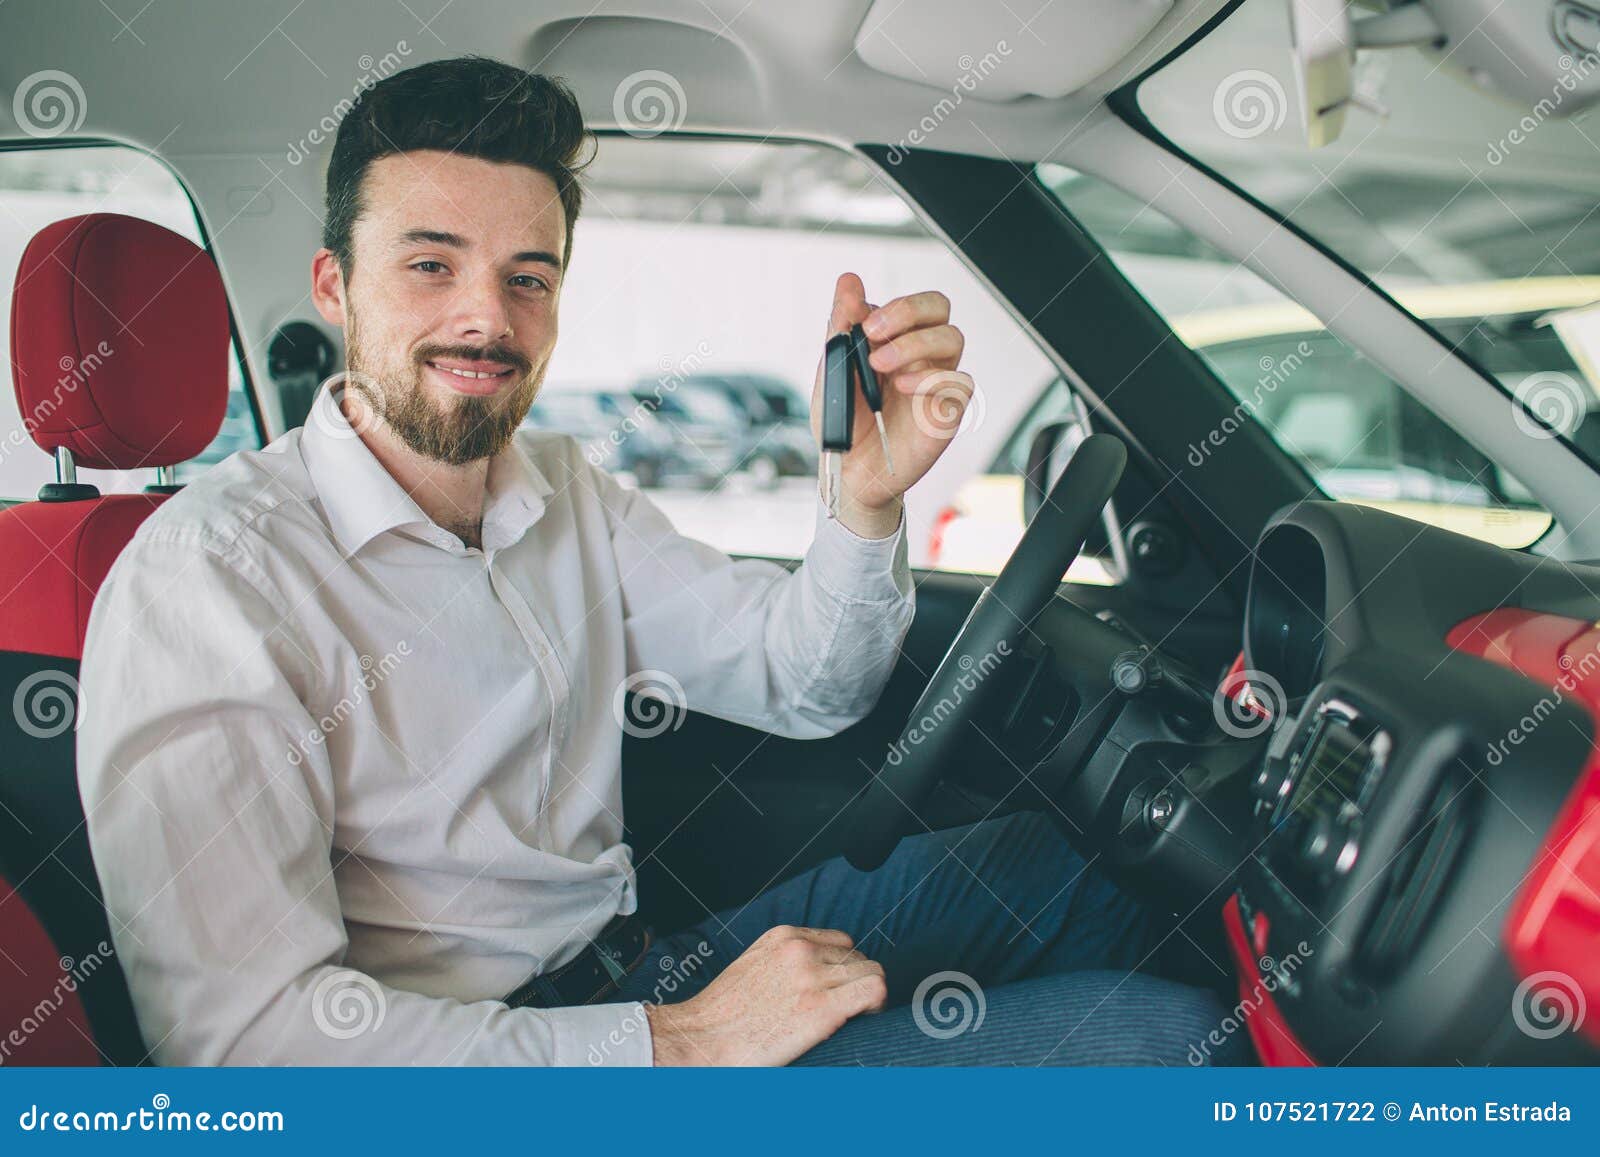 Hand Holding Car Key Remote, with Modern Car Backgrounds. Man Sitting  Inside New Car with Keys. Stock Photo - Image of agent, lock: 107521722